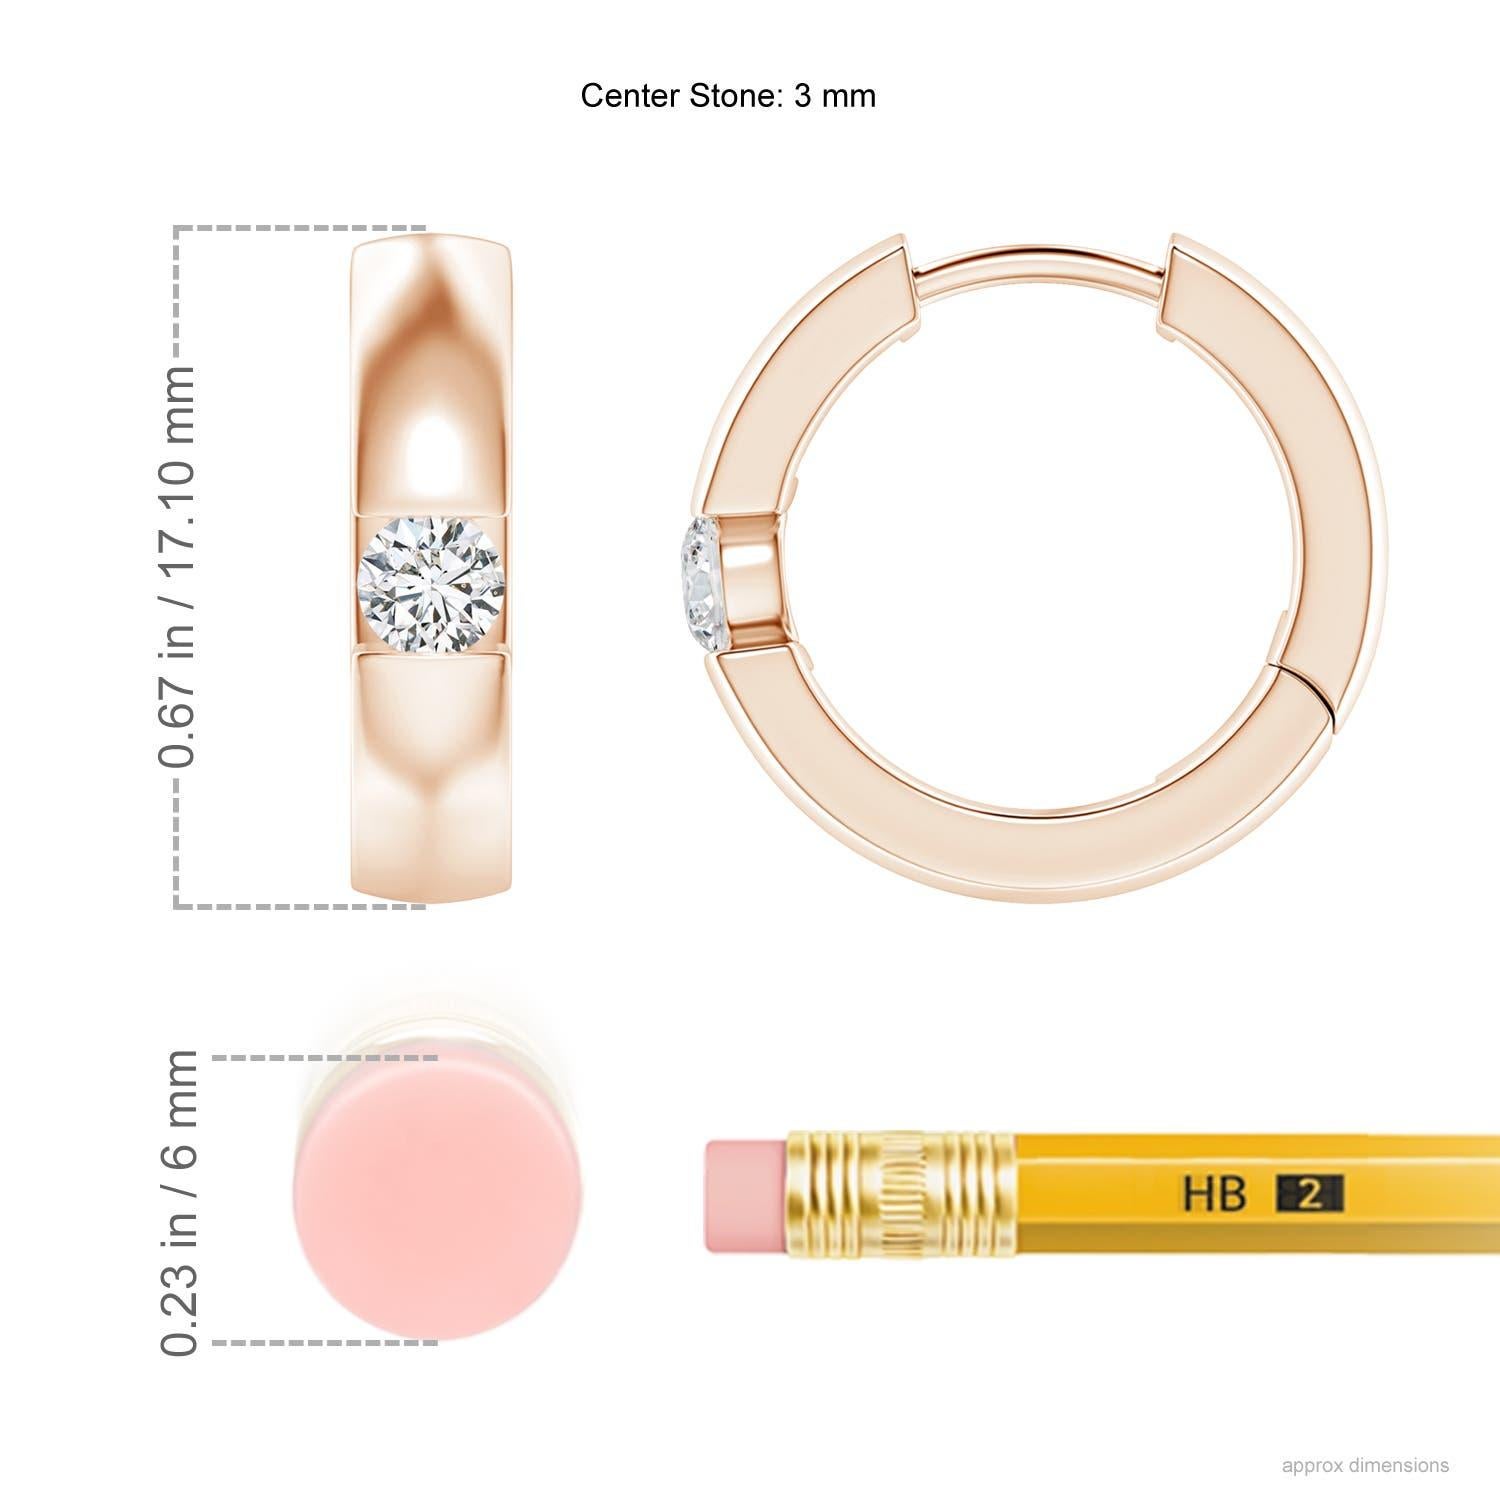 The hoops are studded with beautiful round diamonds in a channel setting. These diamond hinged hoop earrings are designed in 14k rose gold and snugly hug your ears.
Diamond is the Birthstone for April and traditional gift for 10th wedding